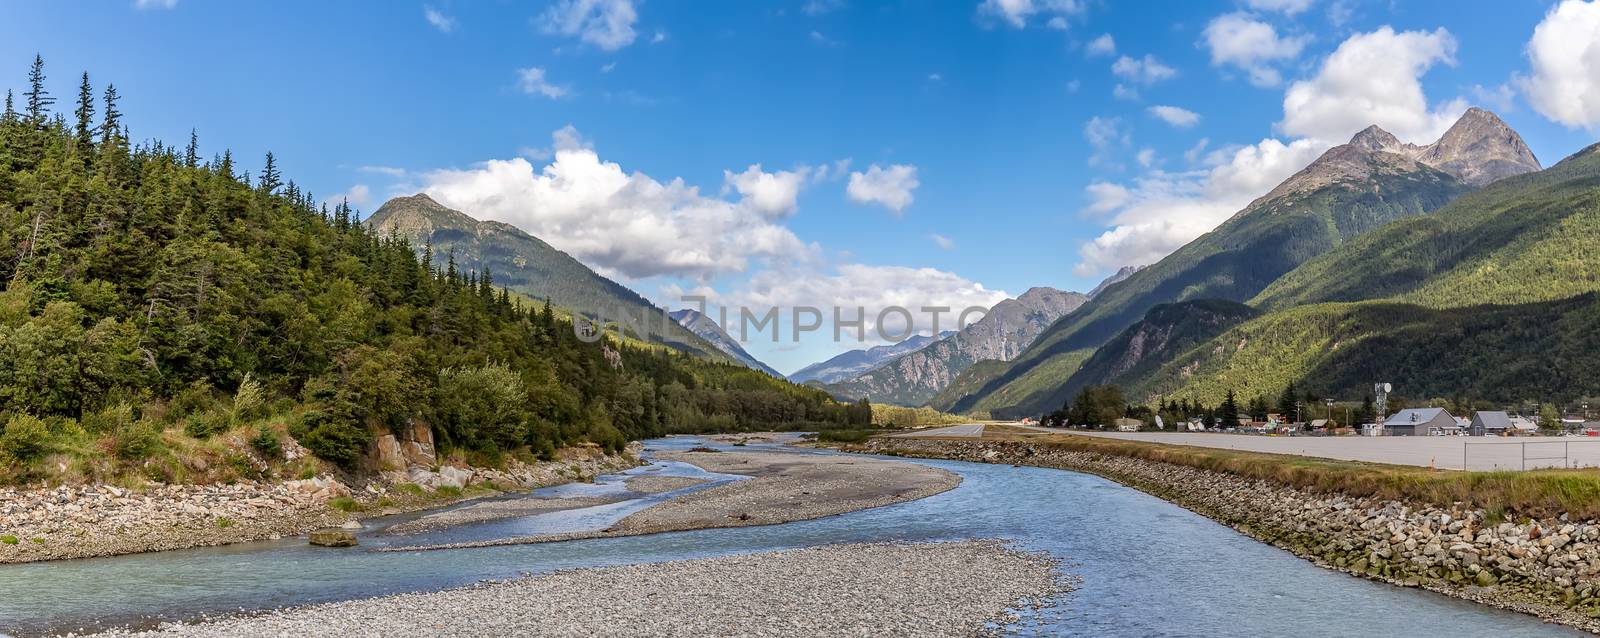 View of shallow Skagway River and Skagway airport in Alaska. Blue cloudy sky and mountain peaks in the background by DamantisZ